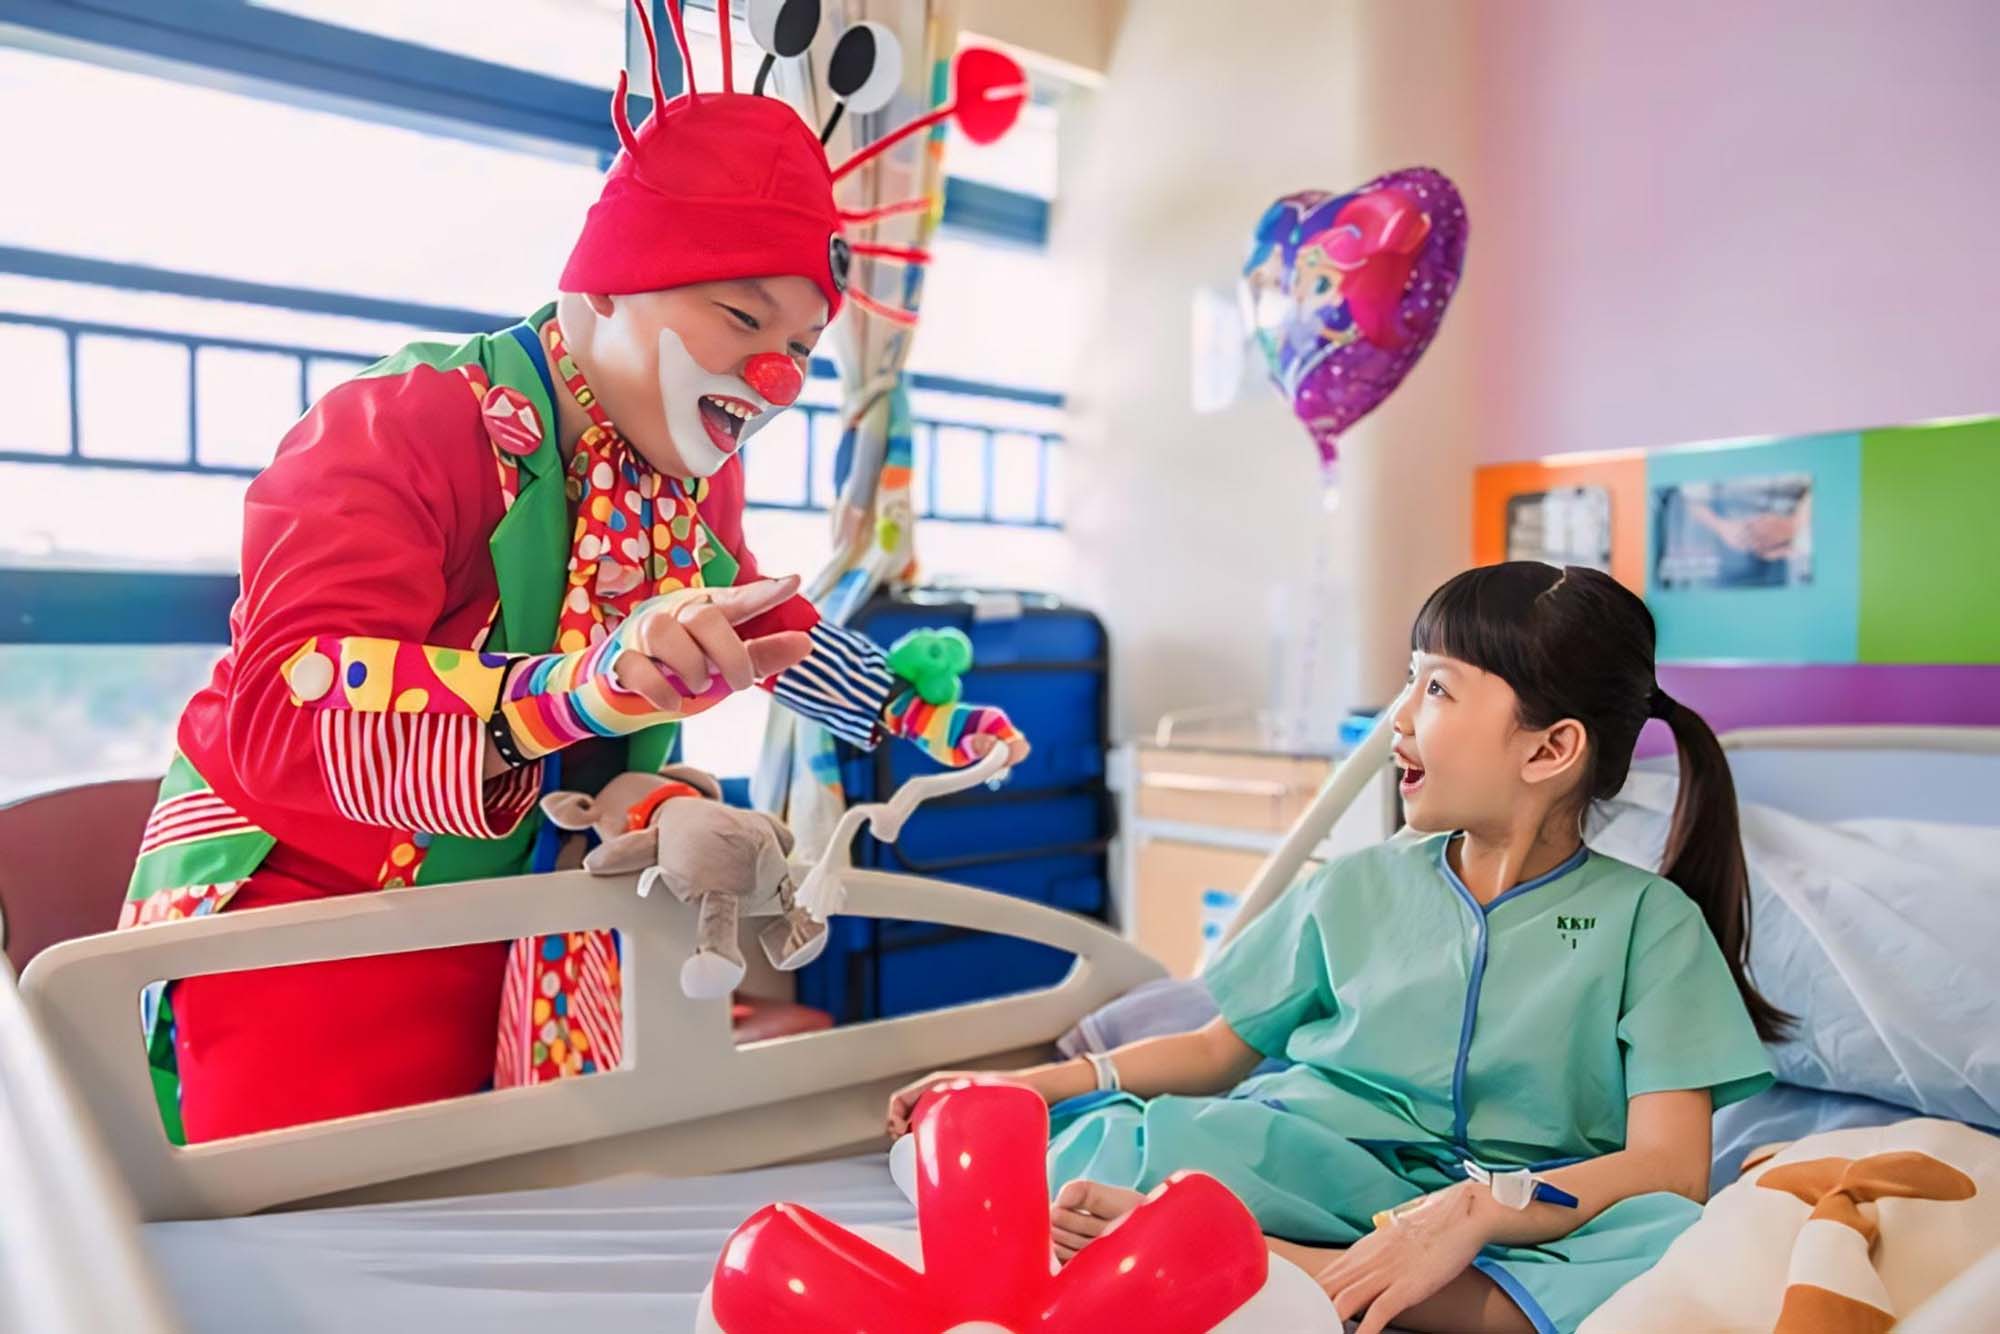 a clown entertaining and making a young female hospitalised patient laugh